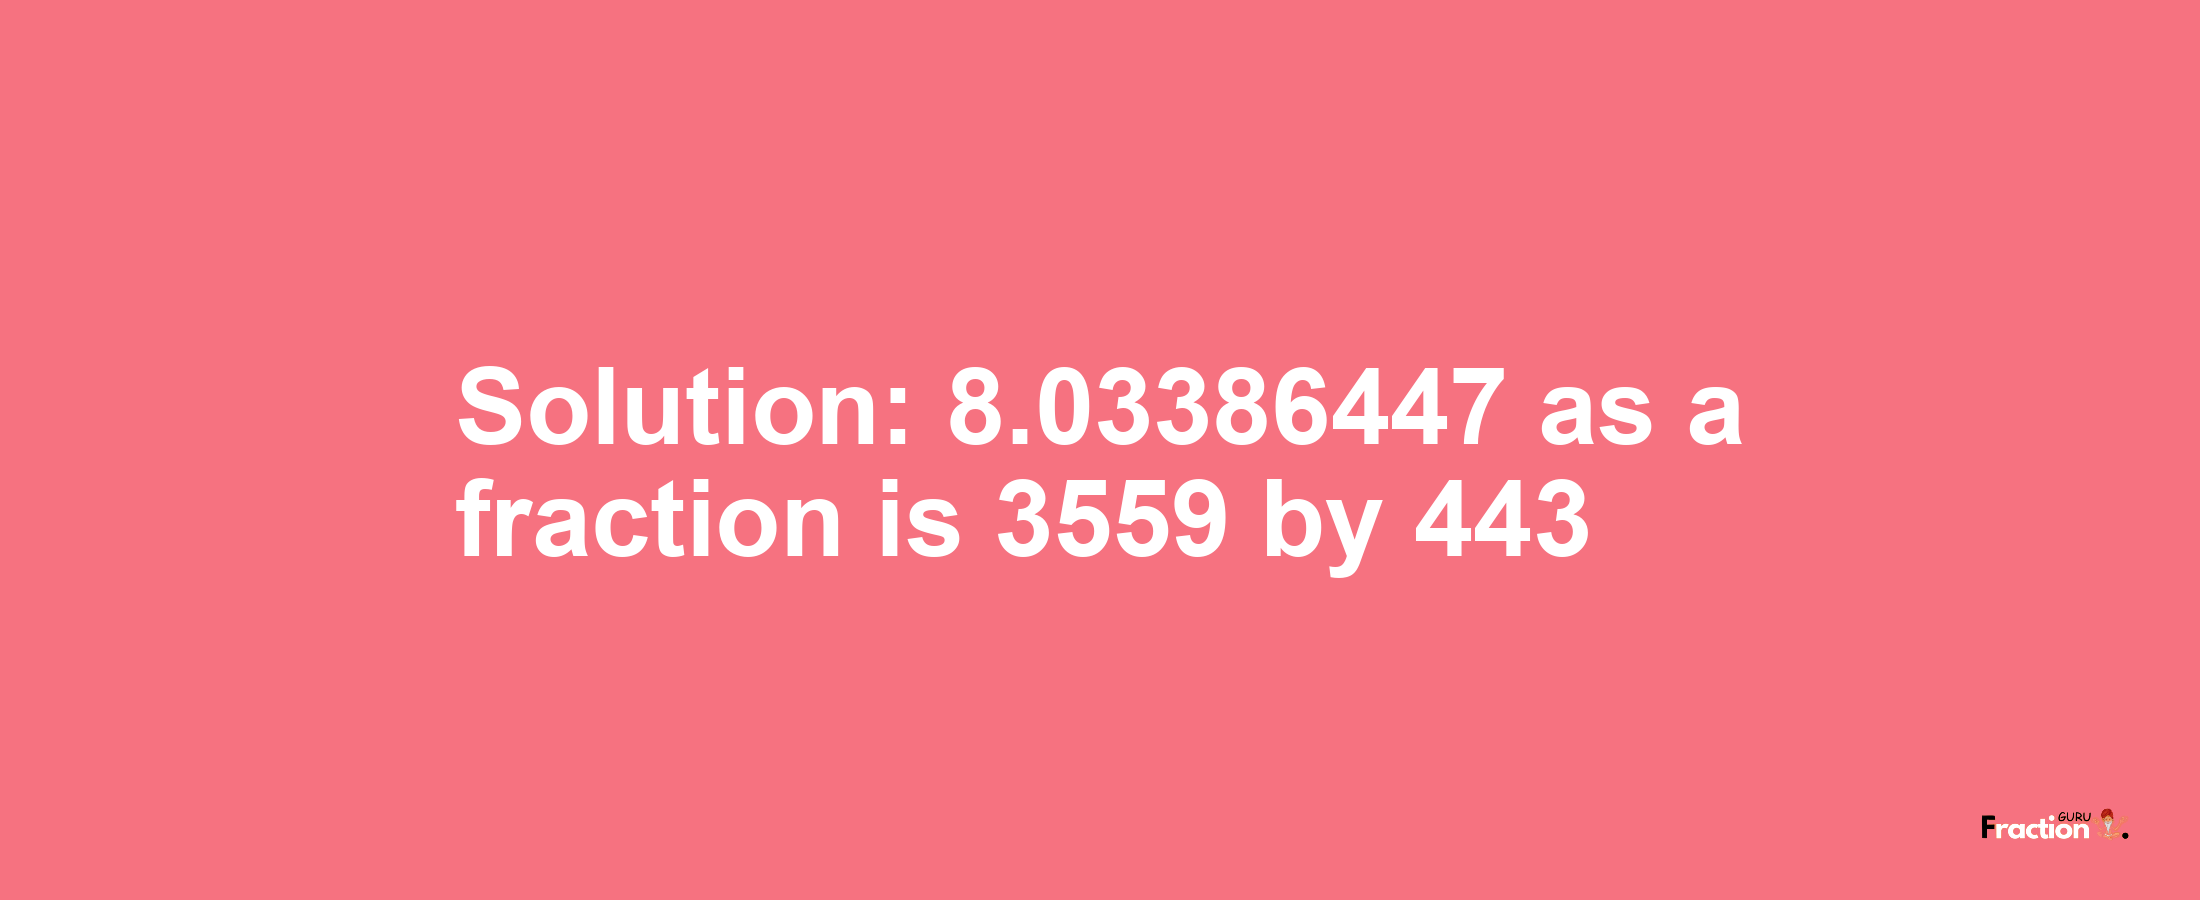 Solution:8.03386447 as a fraction is 3559/443